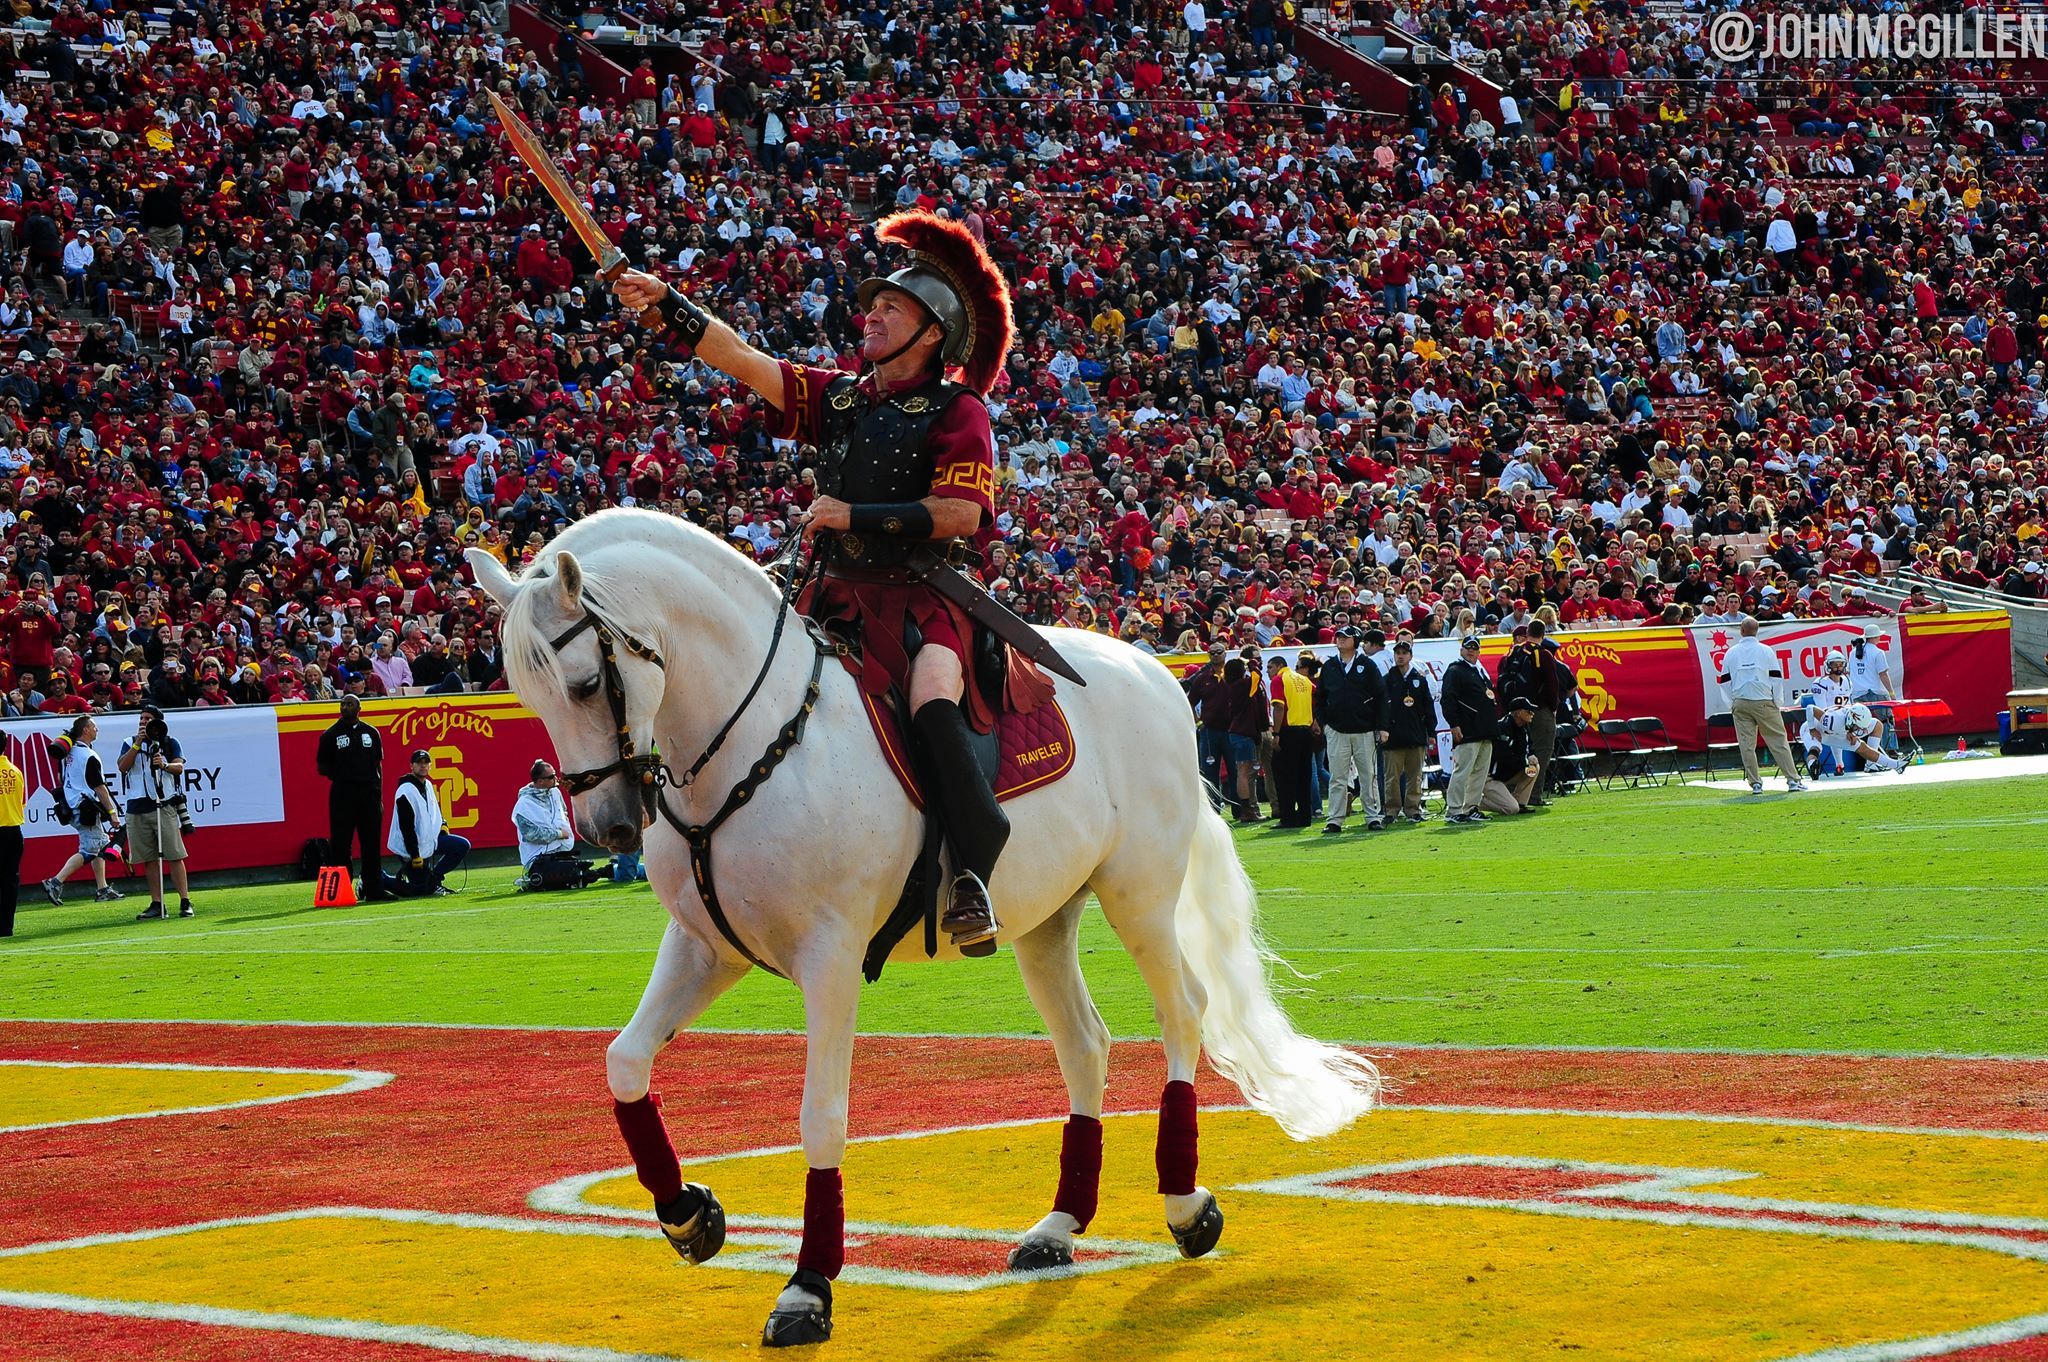 USC Tommy Trojan and Traveler